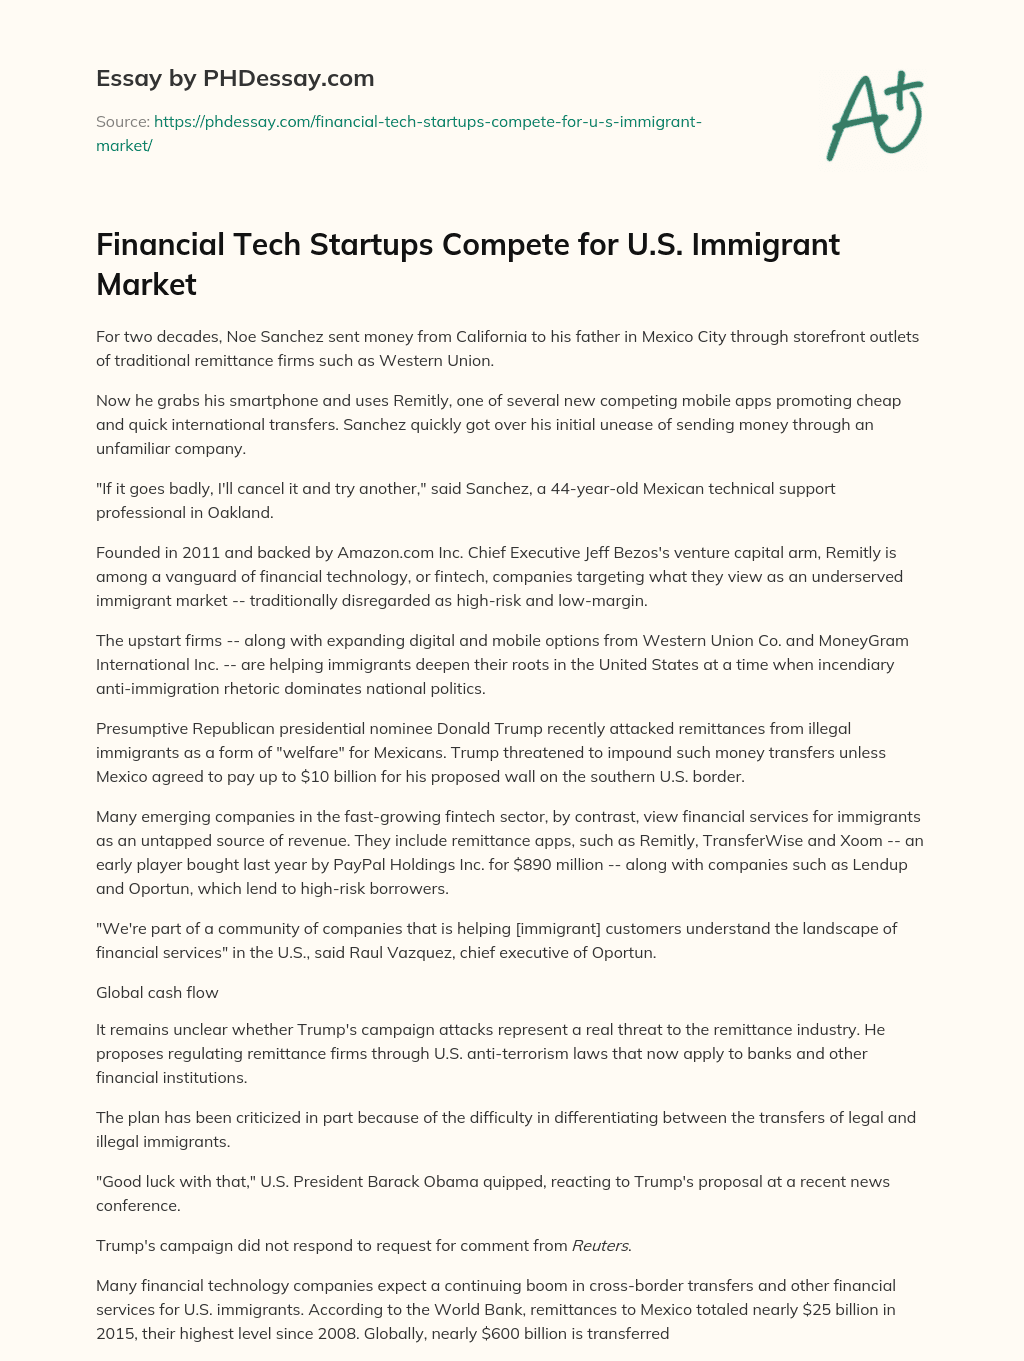 Financial Tech Startups Compete for U.S. Immigrant Market essay